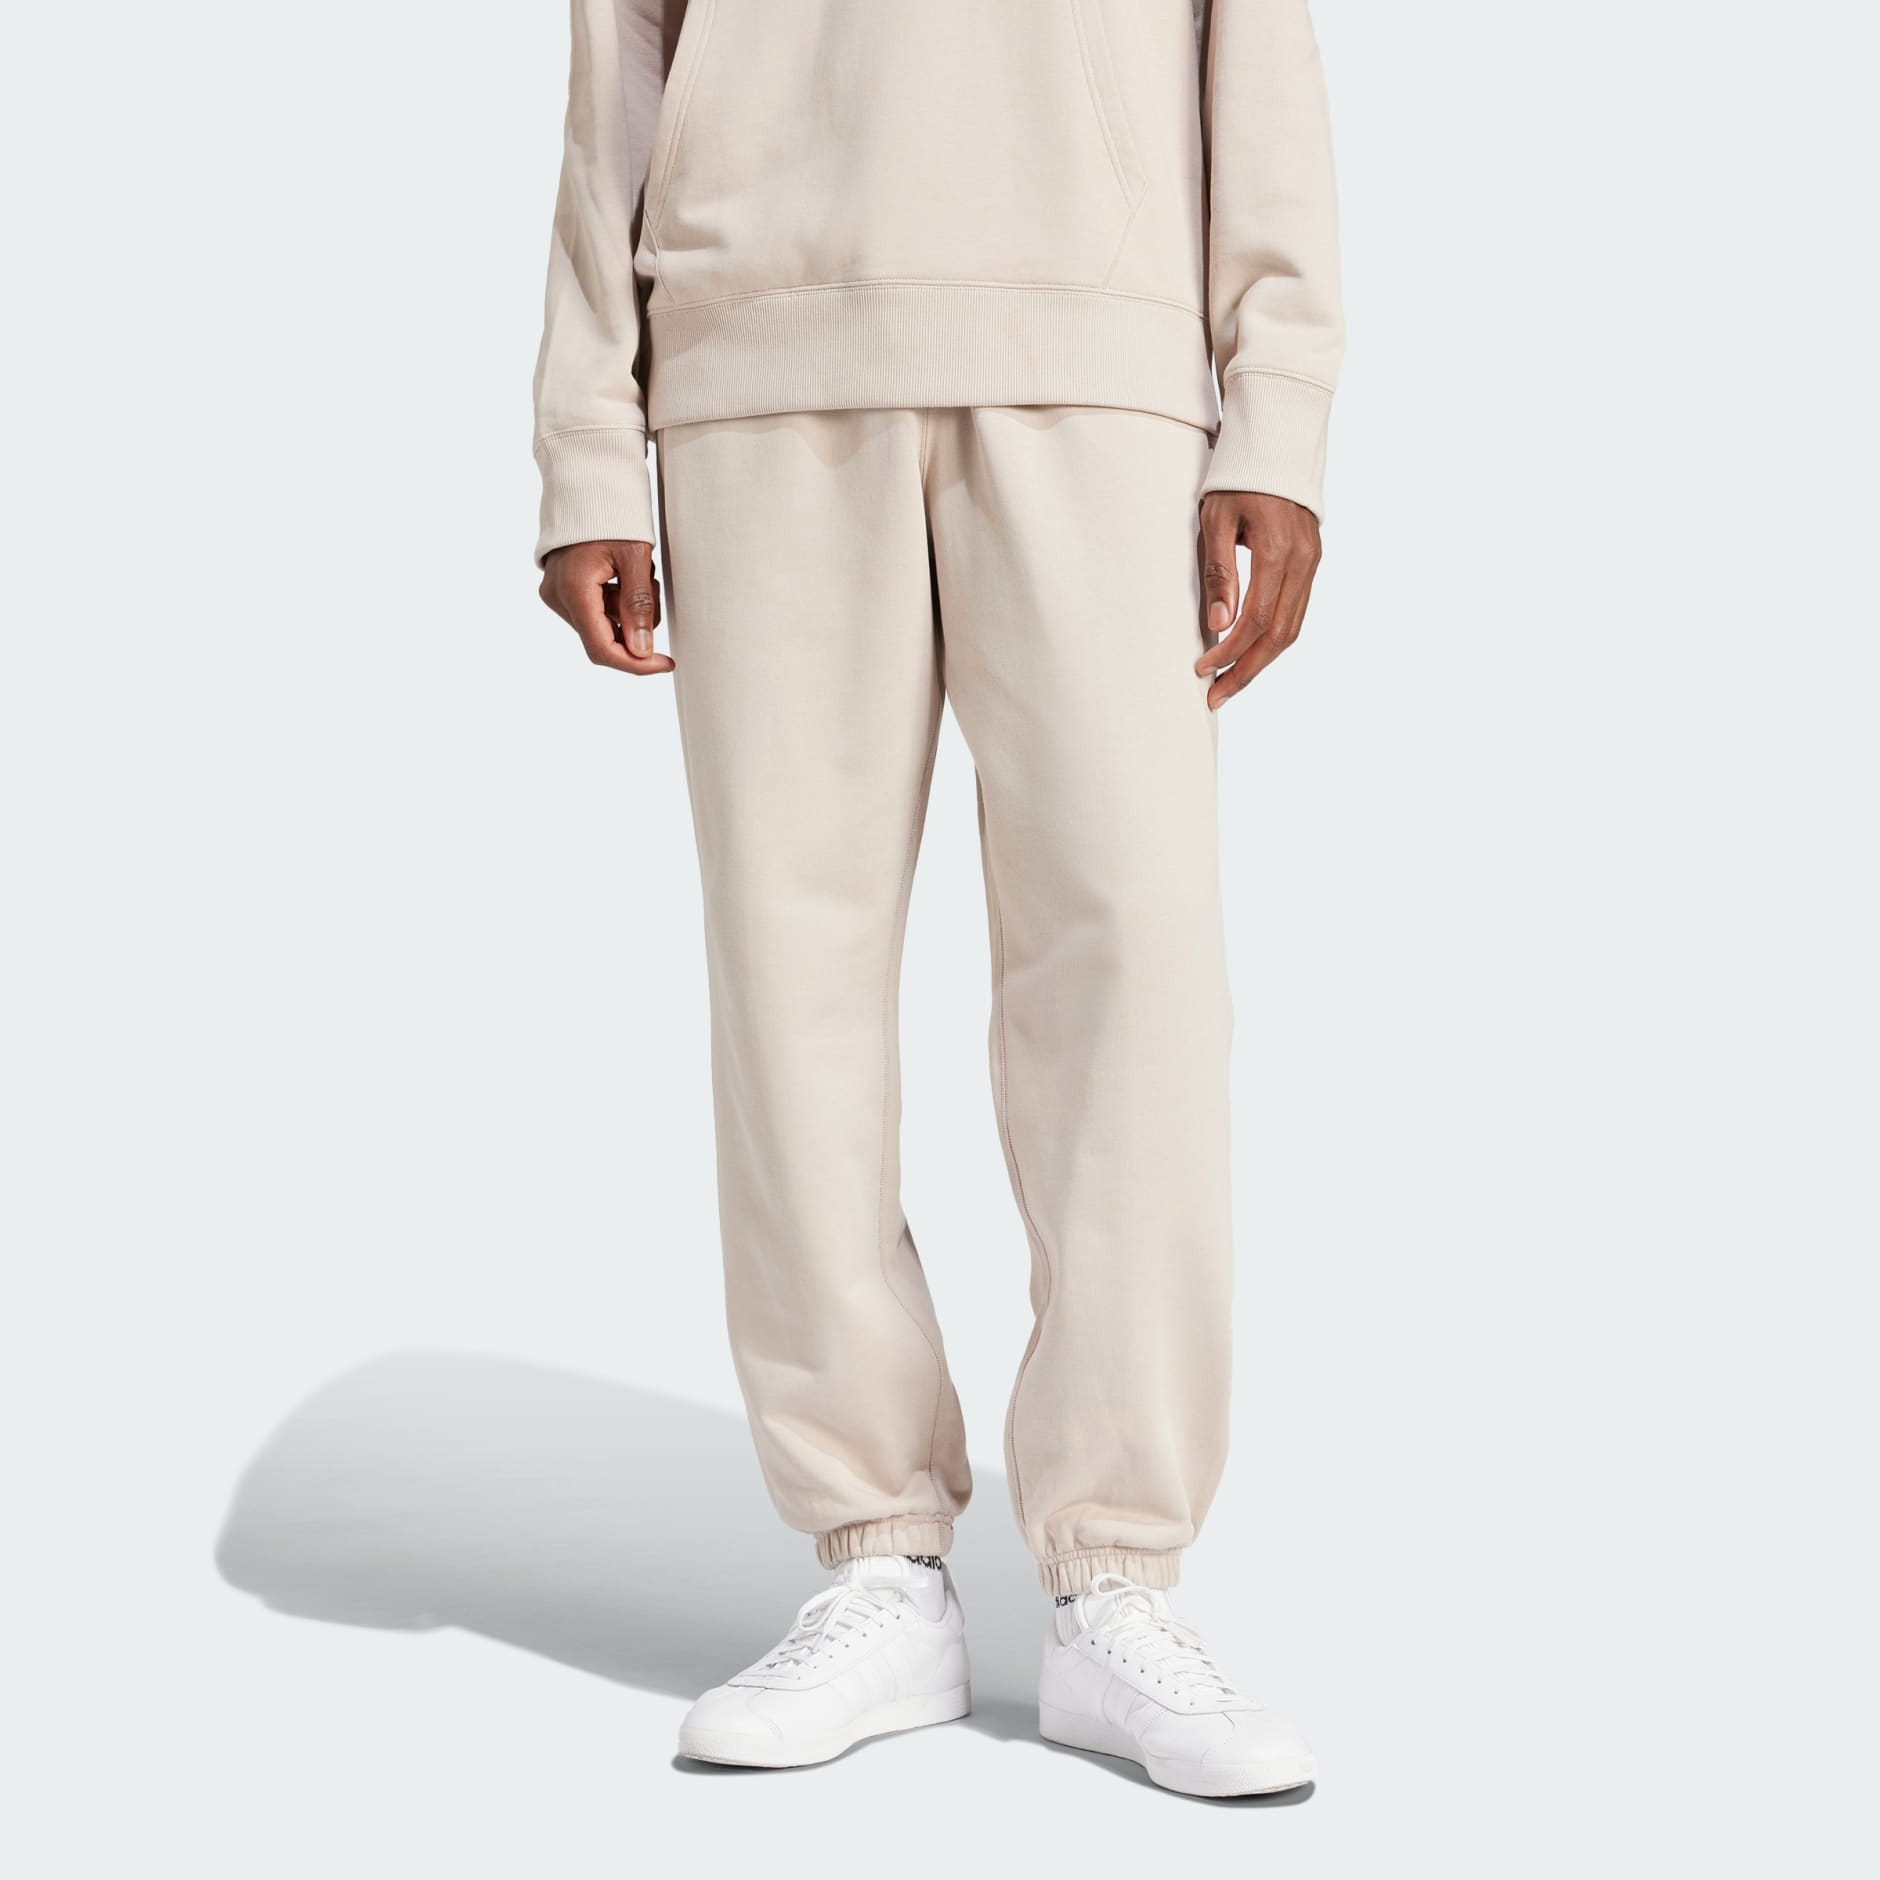 adidas Adicolor Contempo French Terry Sweat Pants - Beige